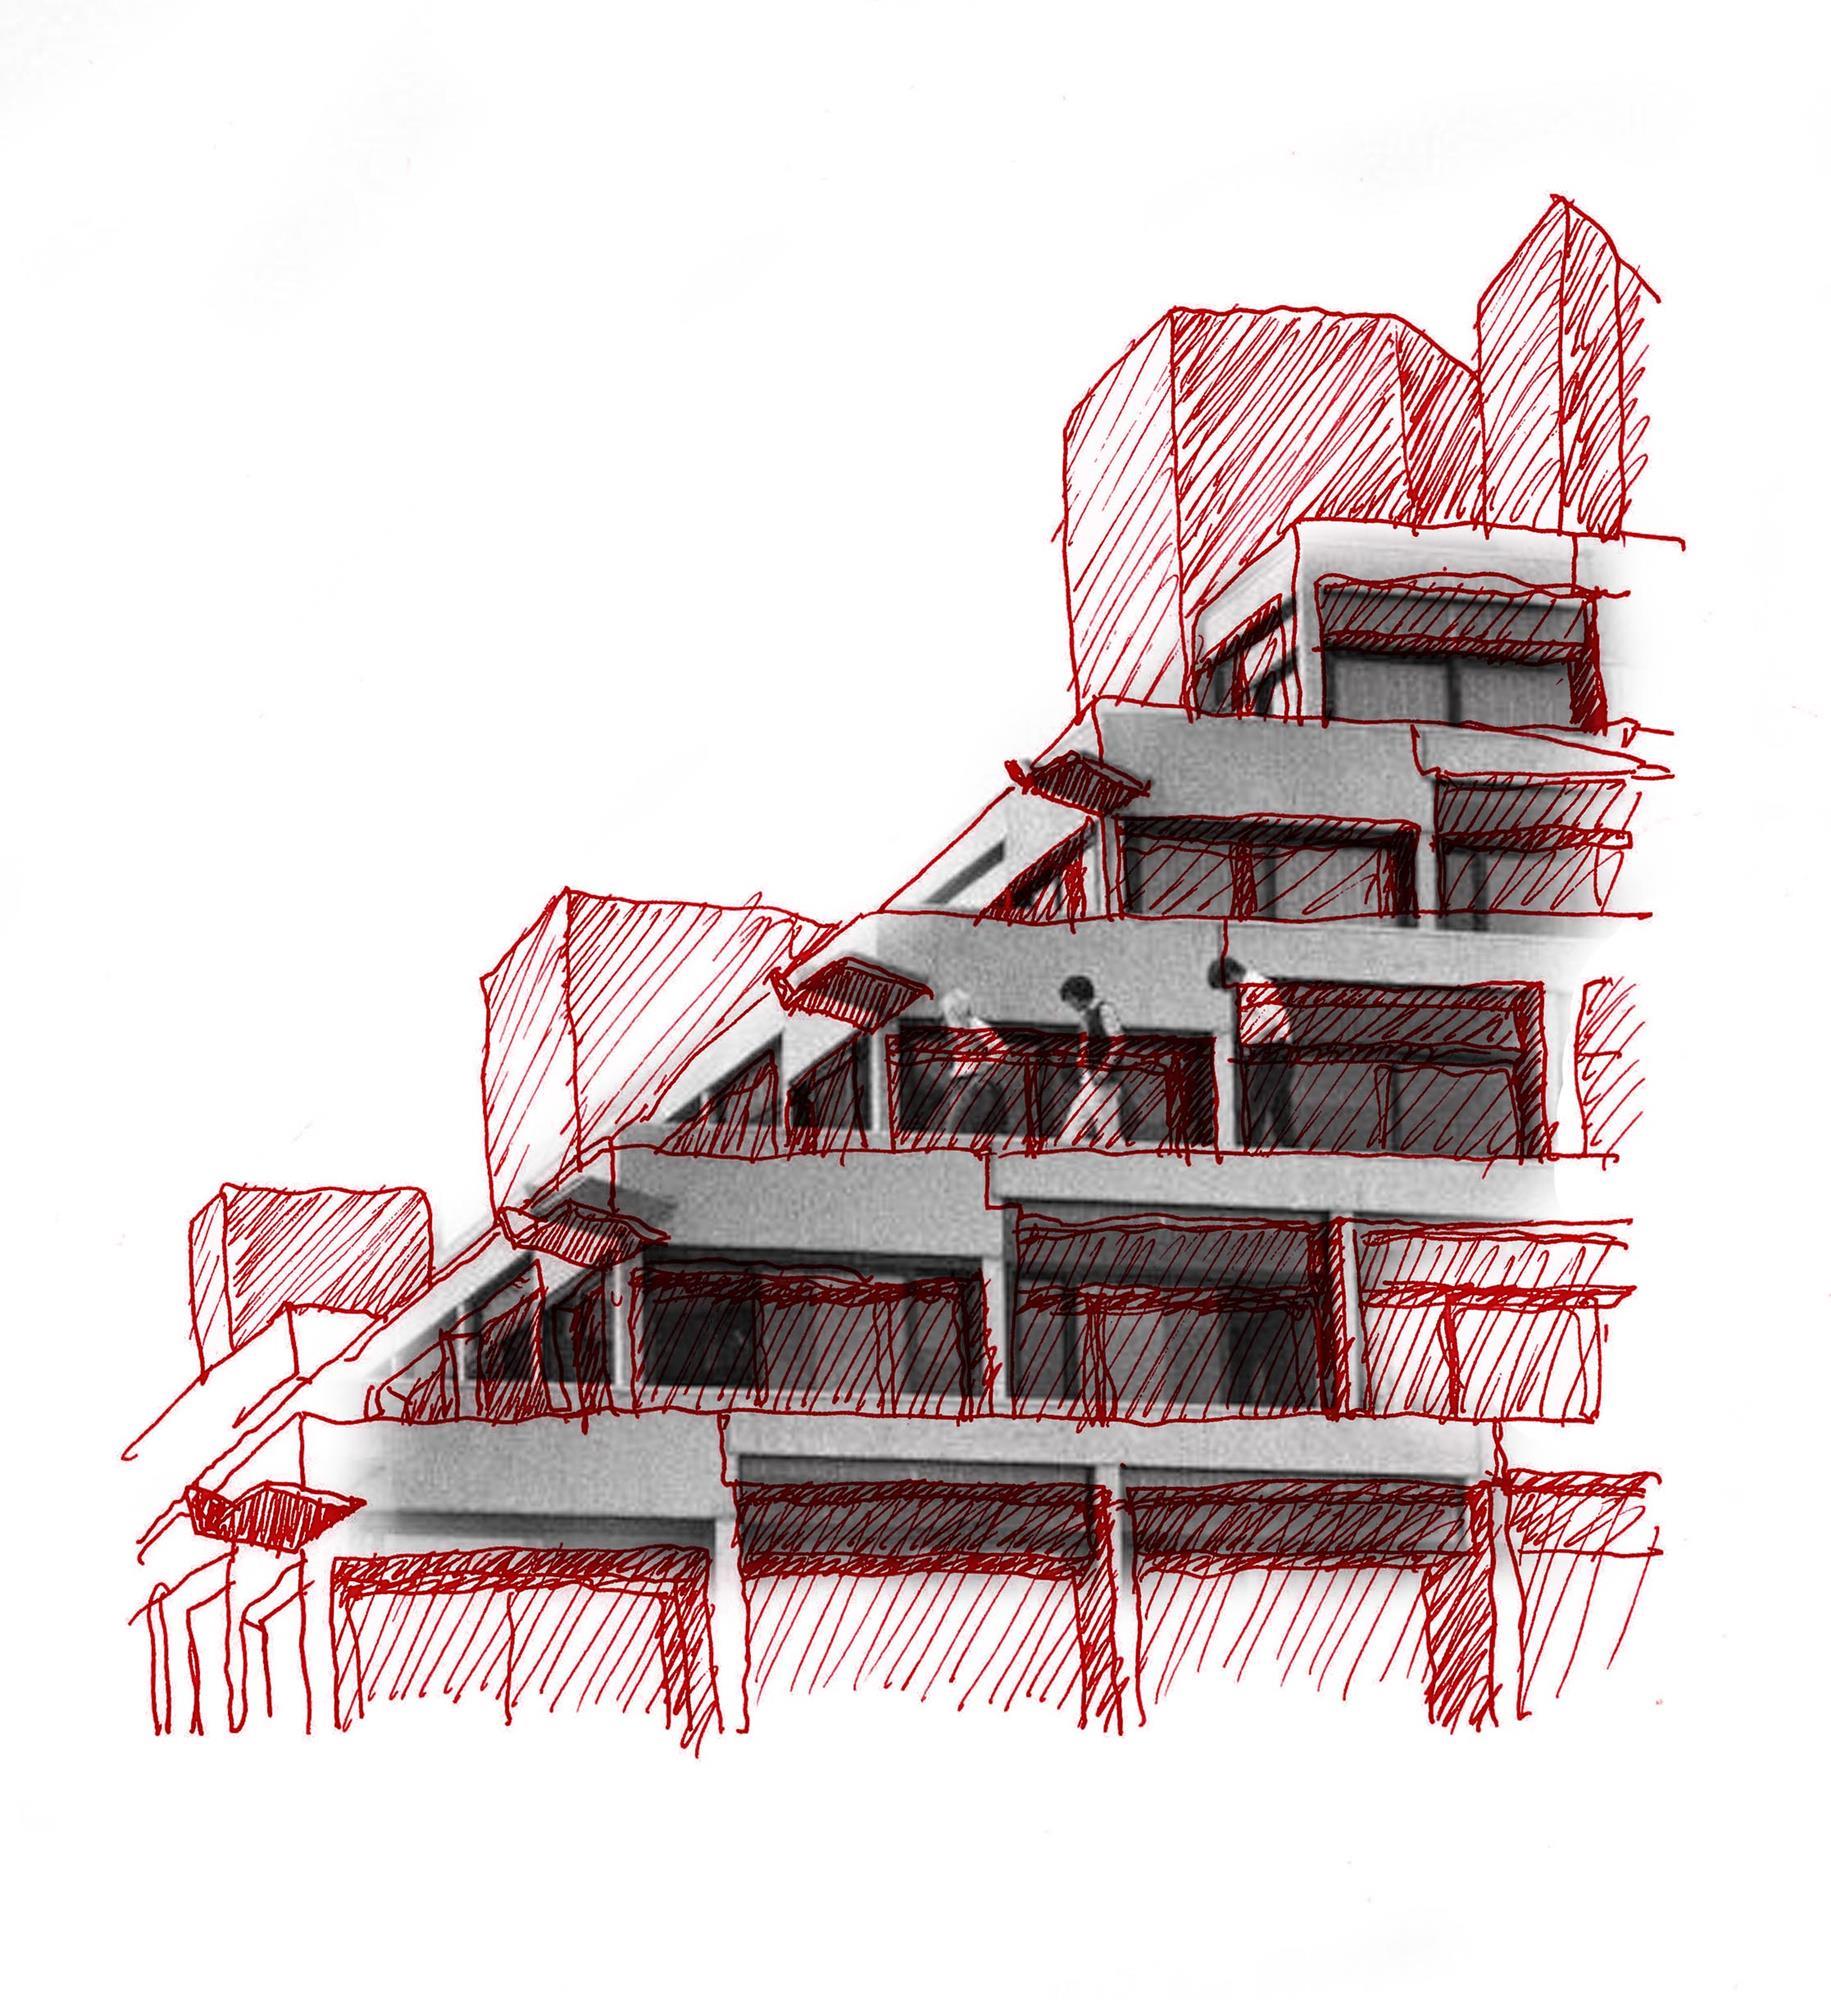 How architectural drawings changed what we think about architecture